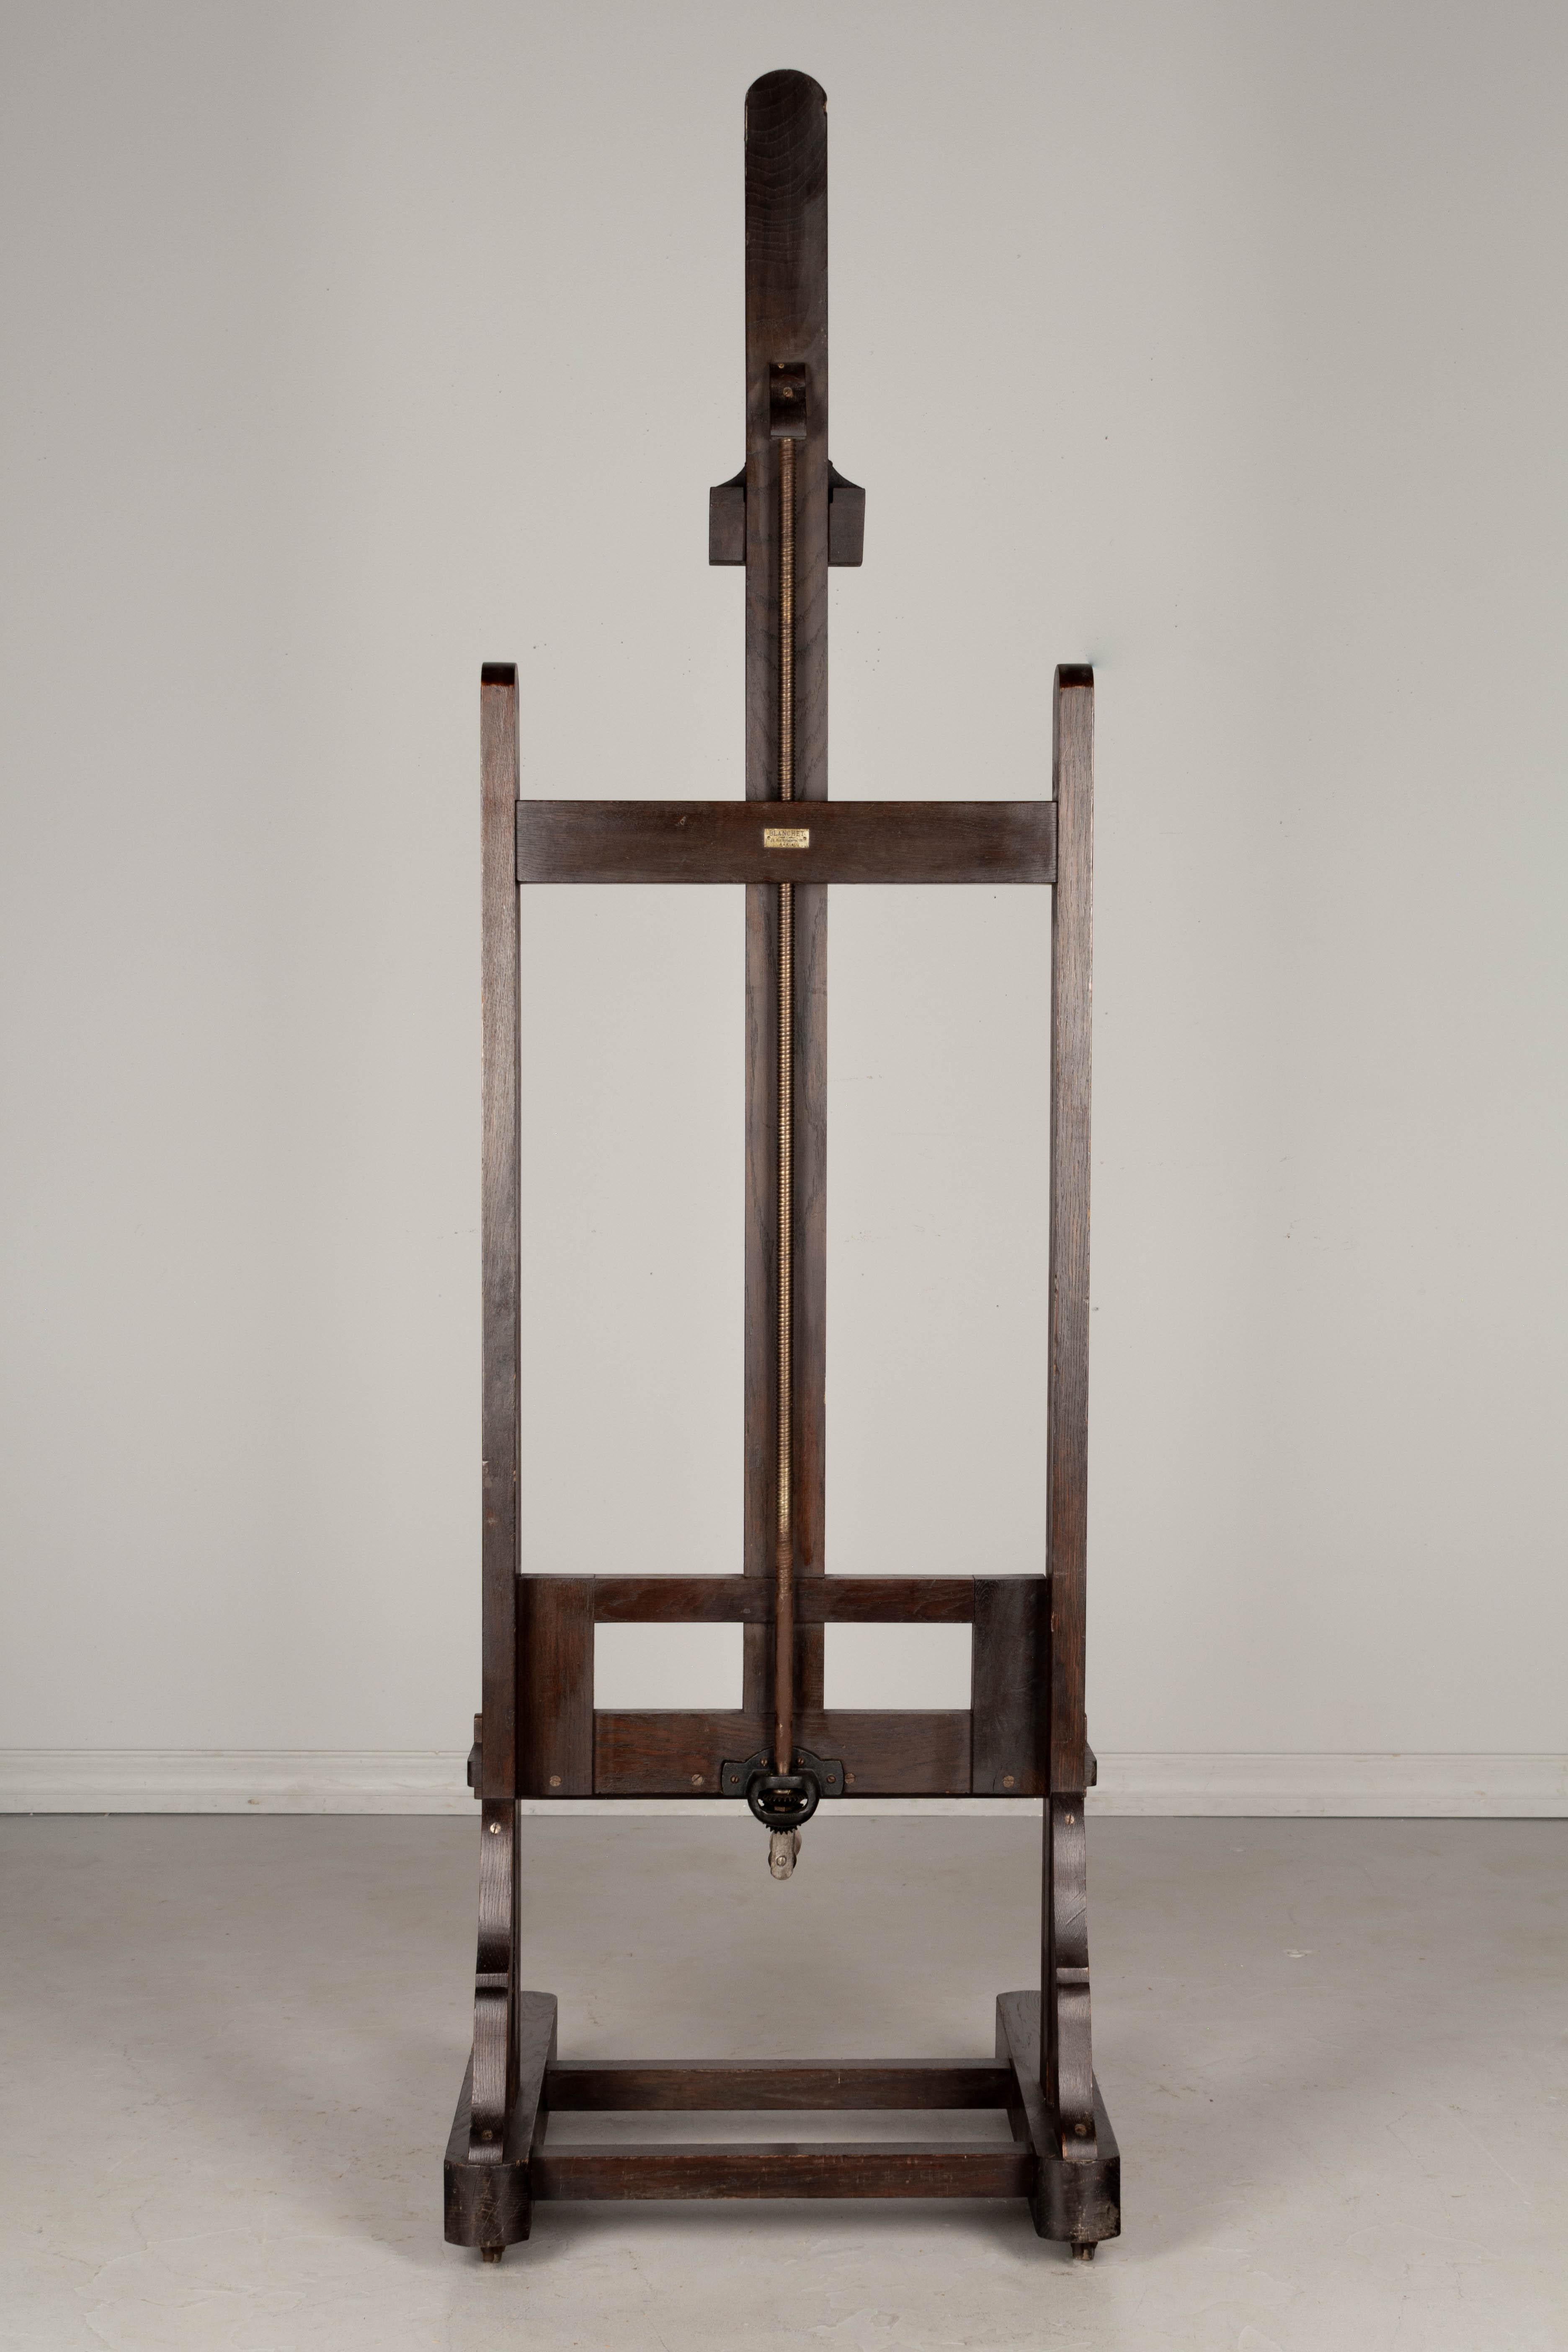 Iron French Chevalet or Painter's Easel